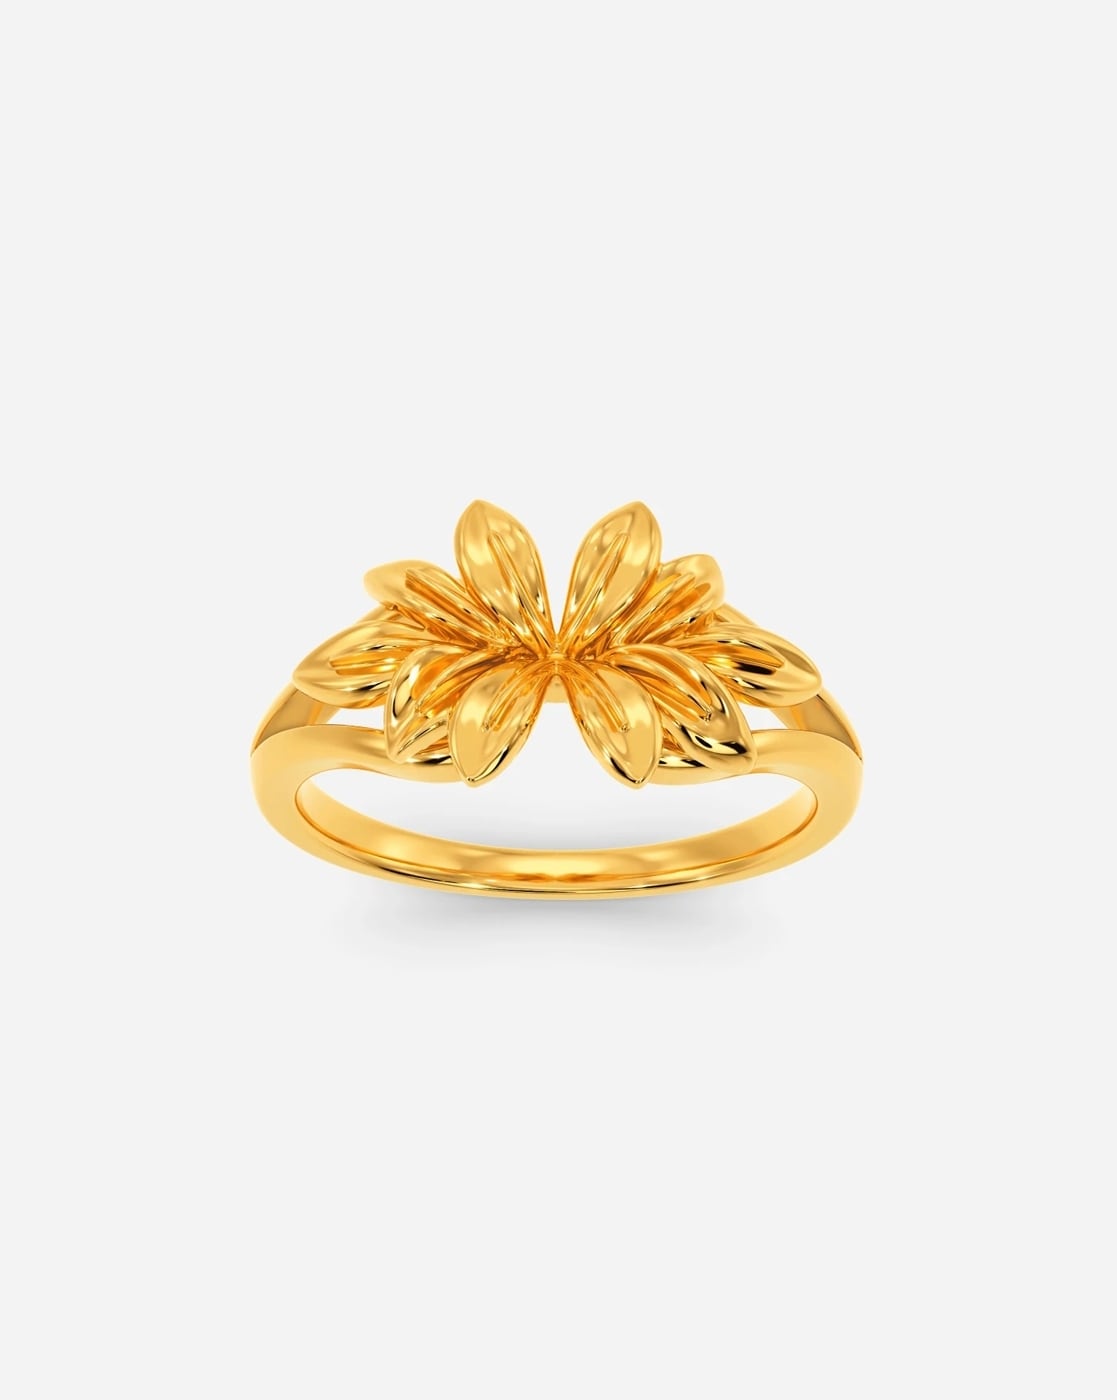 Tanishq Beautiful Gold Ring Price Starting From Rs 10,842 | Find Verified  Sellers at Justdial